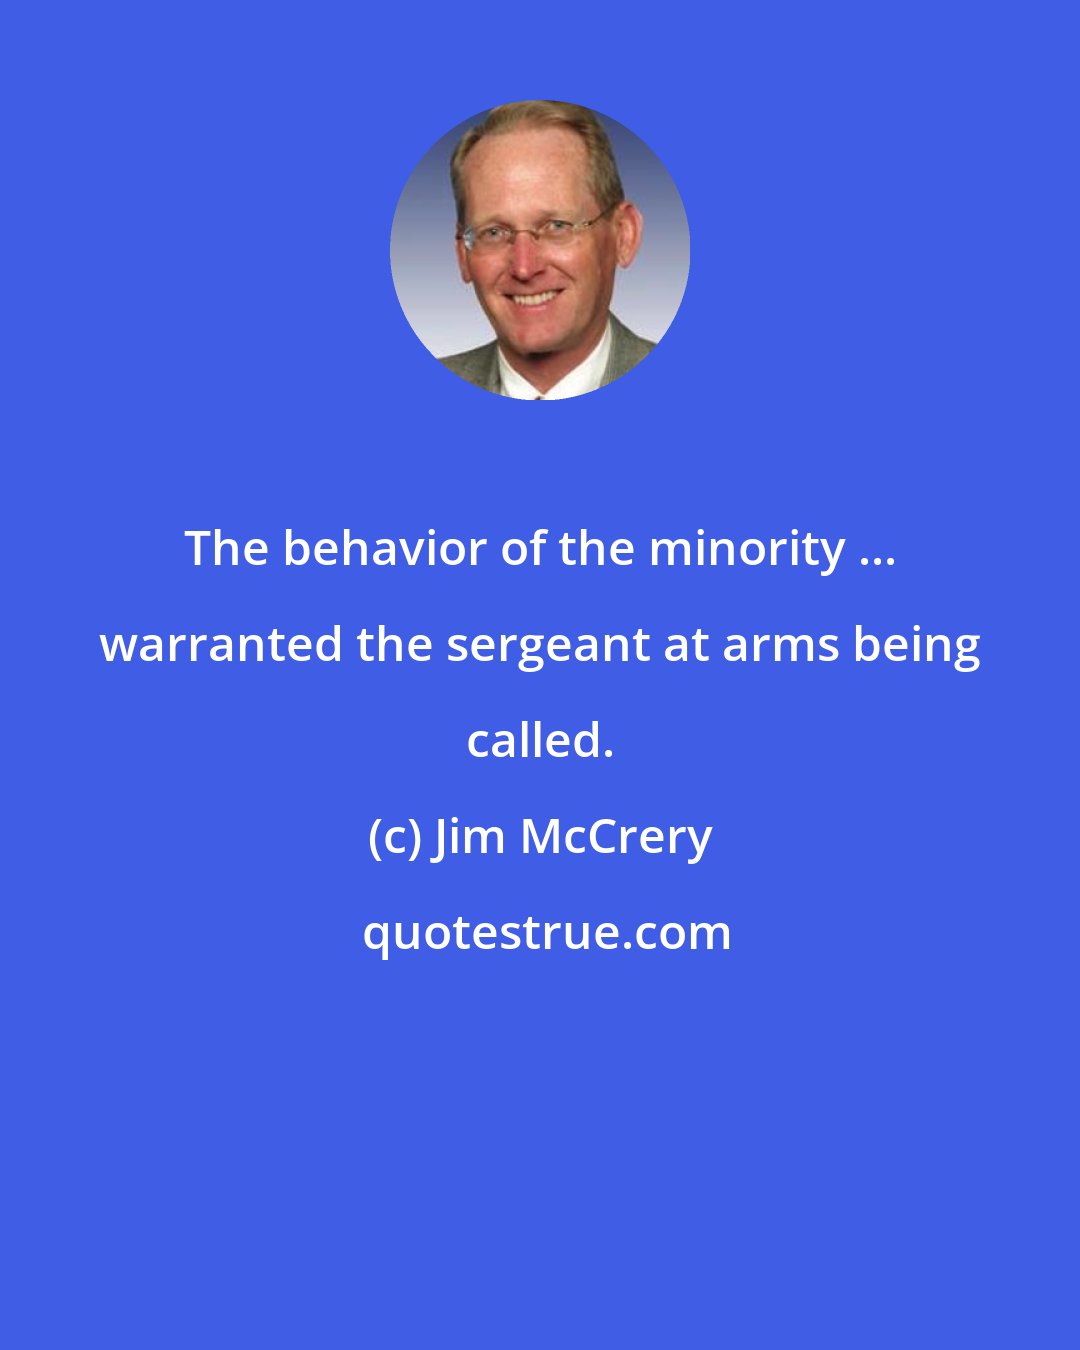 Jim McCrery: The behavior of the minority ... warranted the sergeant at arms being called.